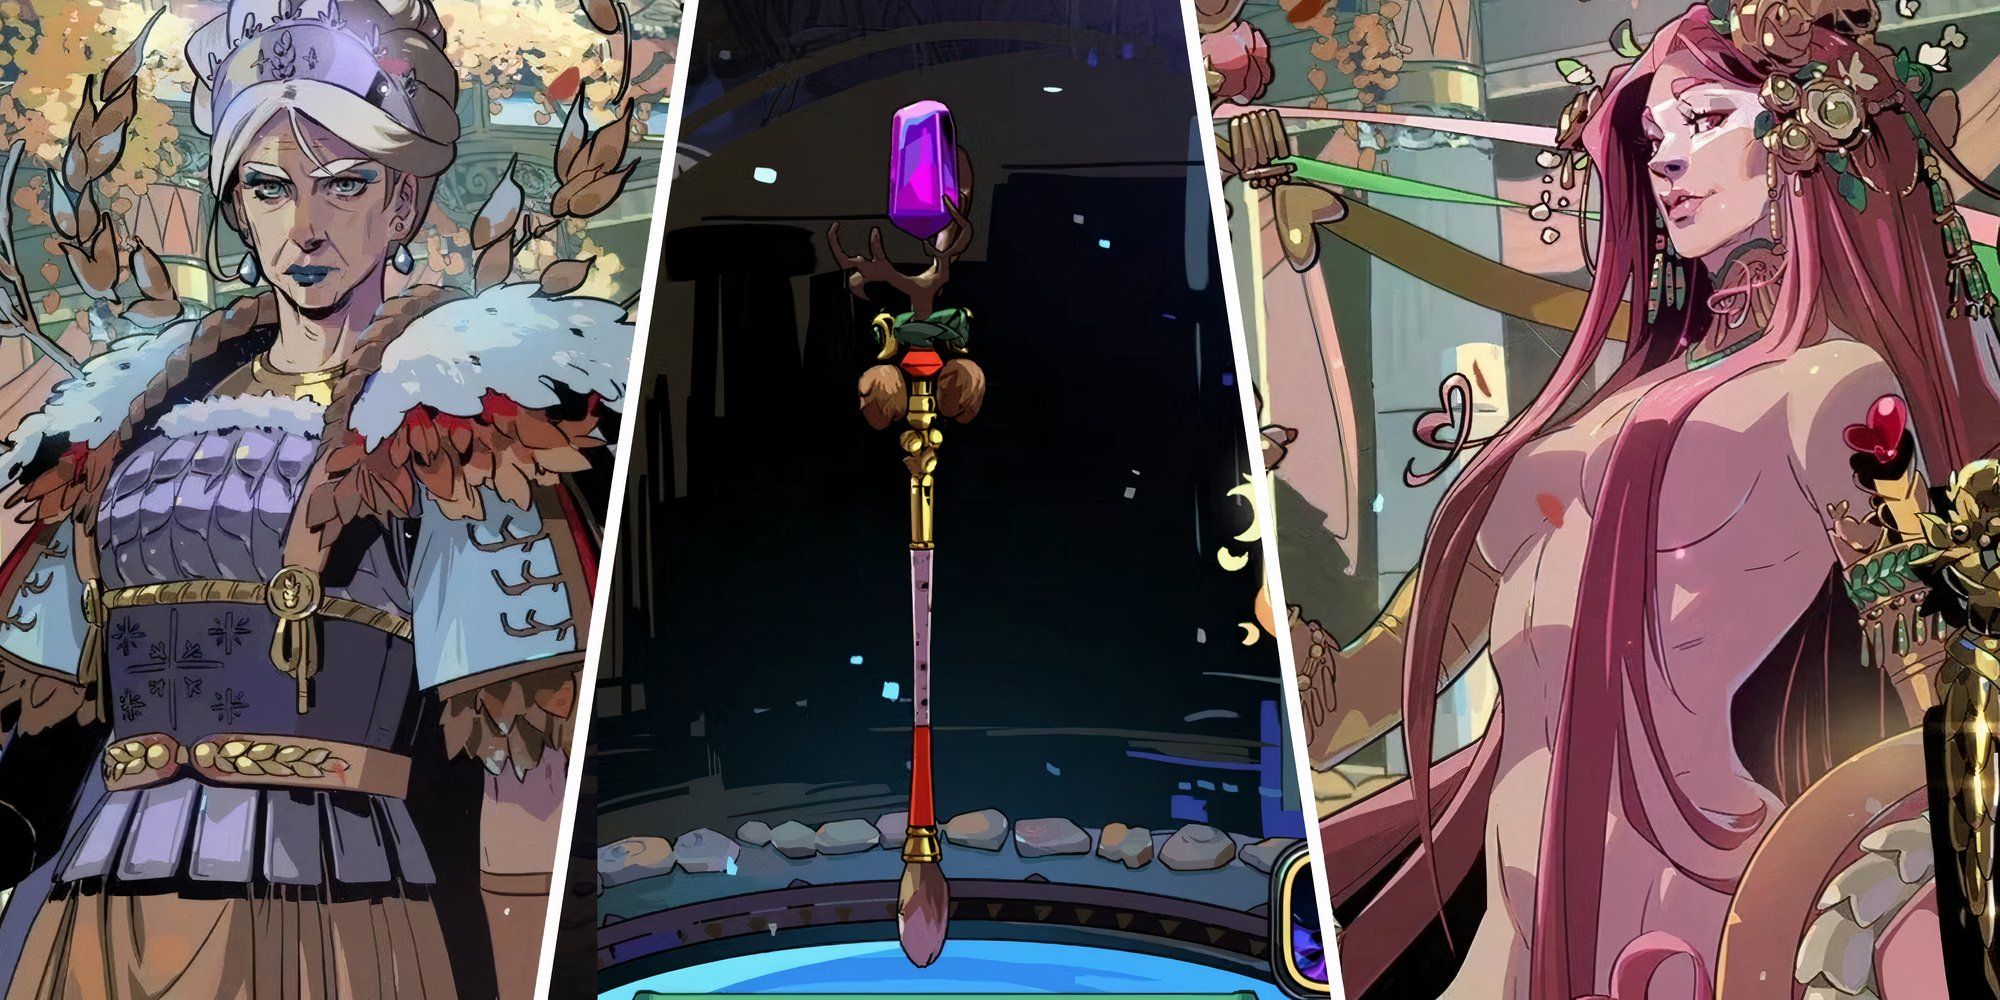 A split image showing Gods and weapon from Hades 2